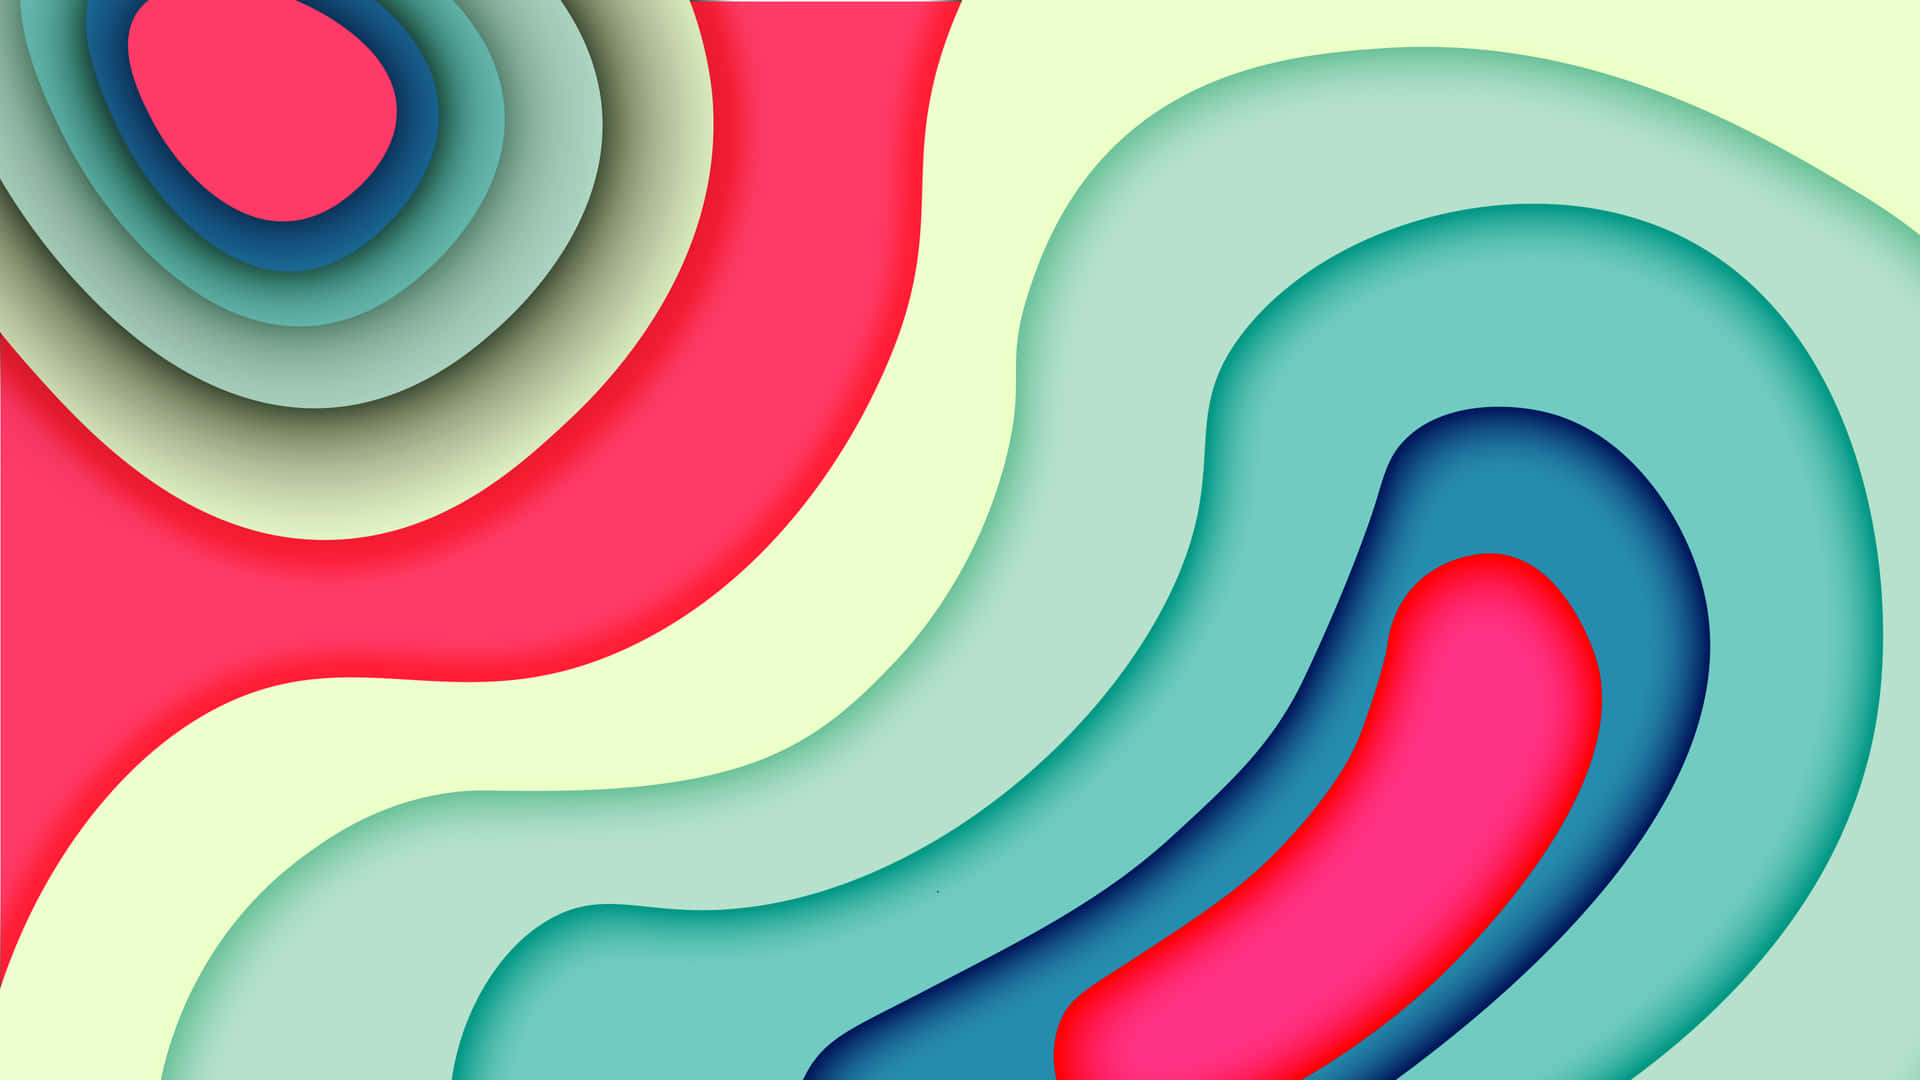 Multicolored Swirl Patterns Paper Cut Style Background